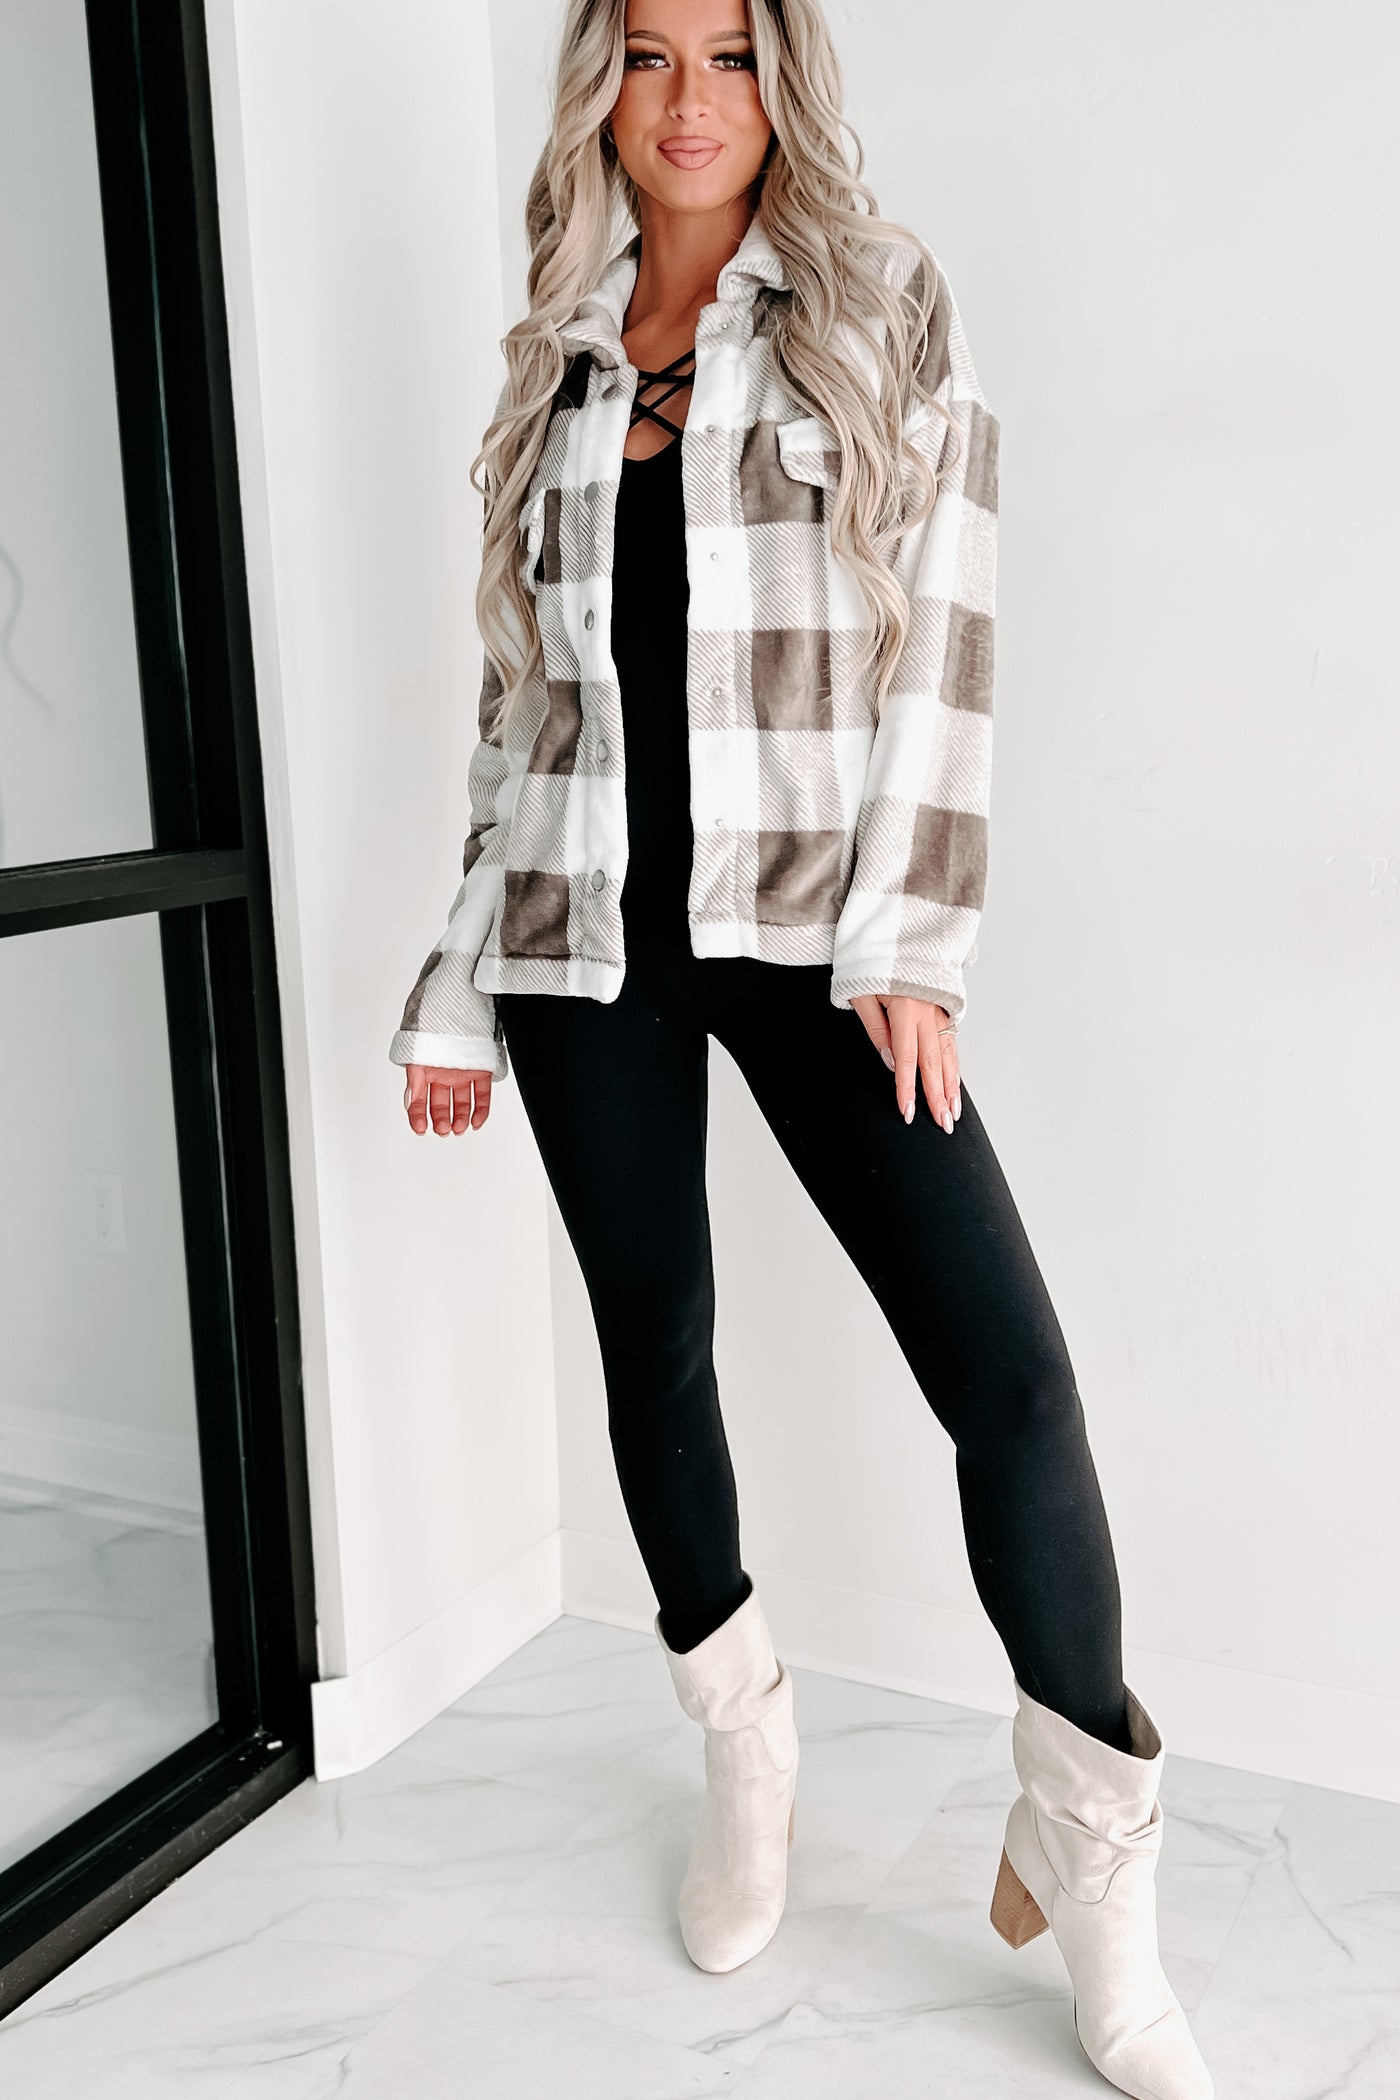 Doorbuster- Too Much To Ask Fuzzy Plaid Jacket (Gray) - NanaMacs